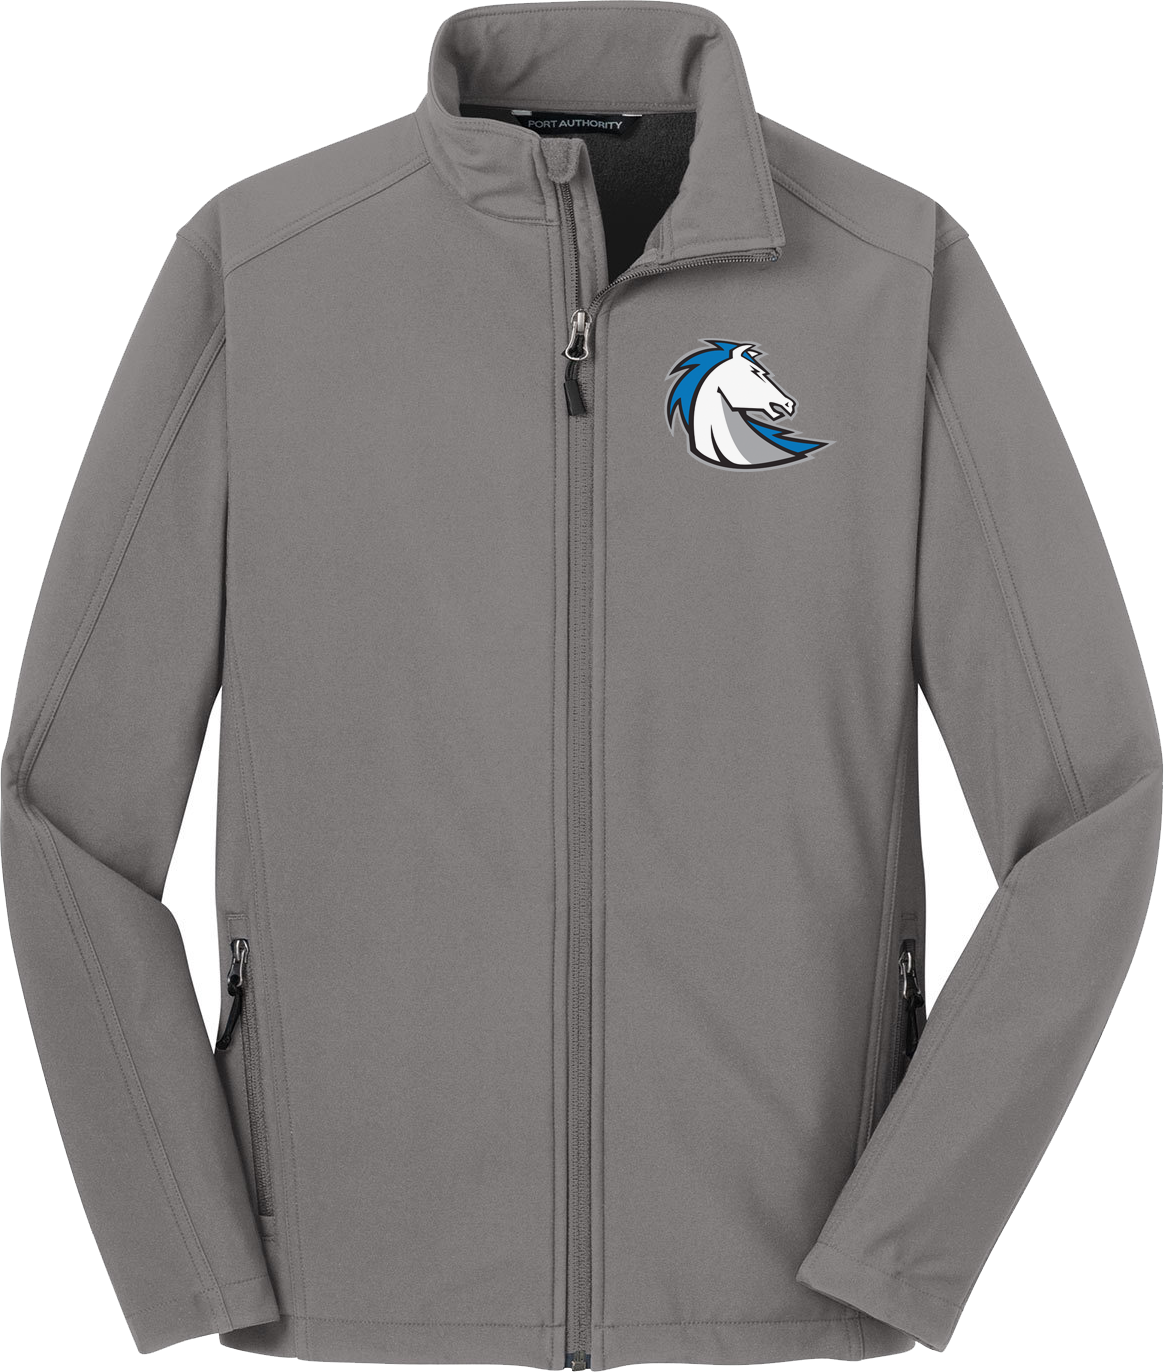 Clear Springs Lacrosse Soft Shell Jacket